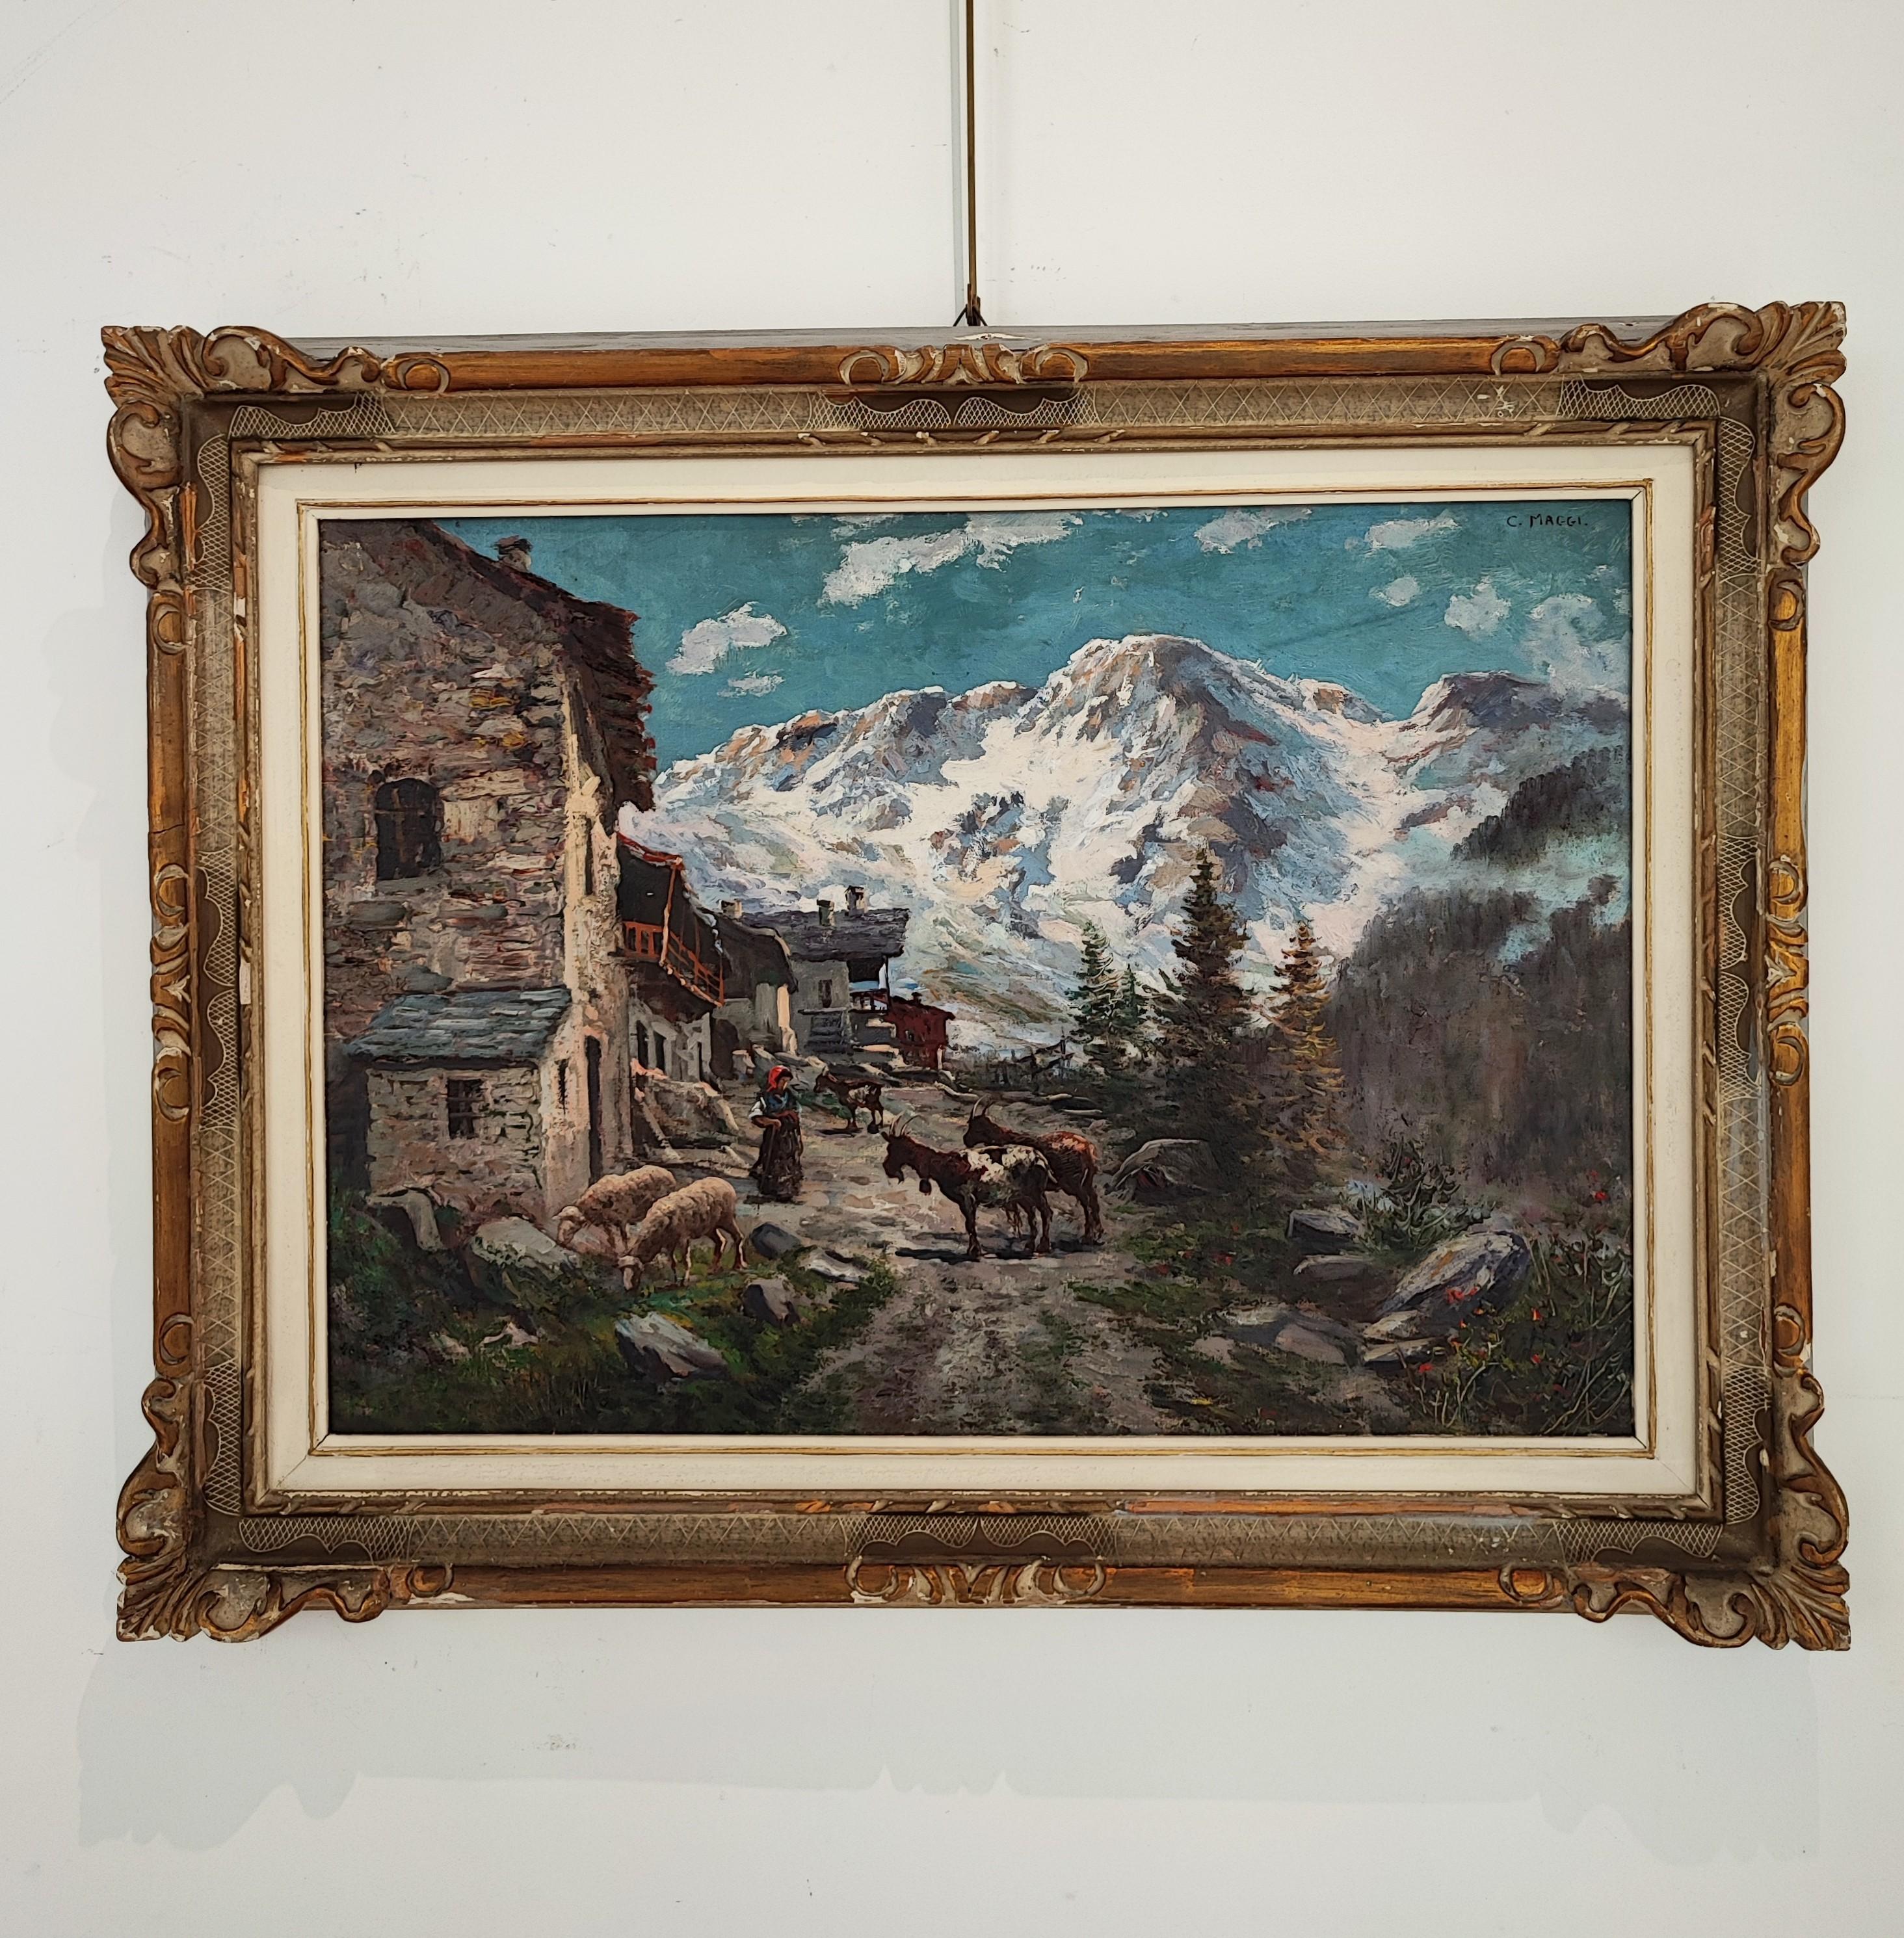 Aosta Valley - Painting by Cesare Maggi